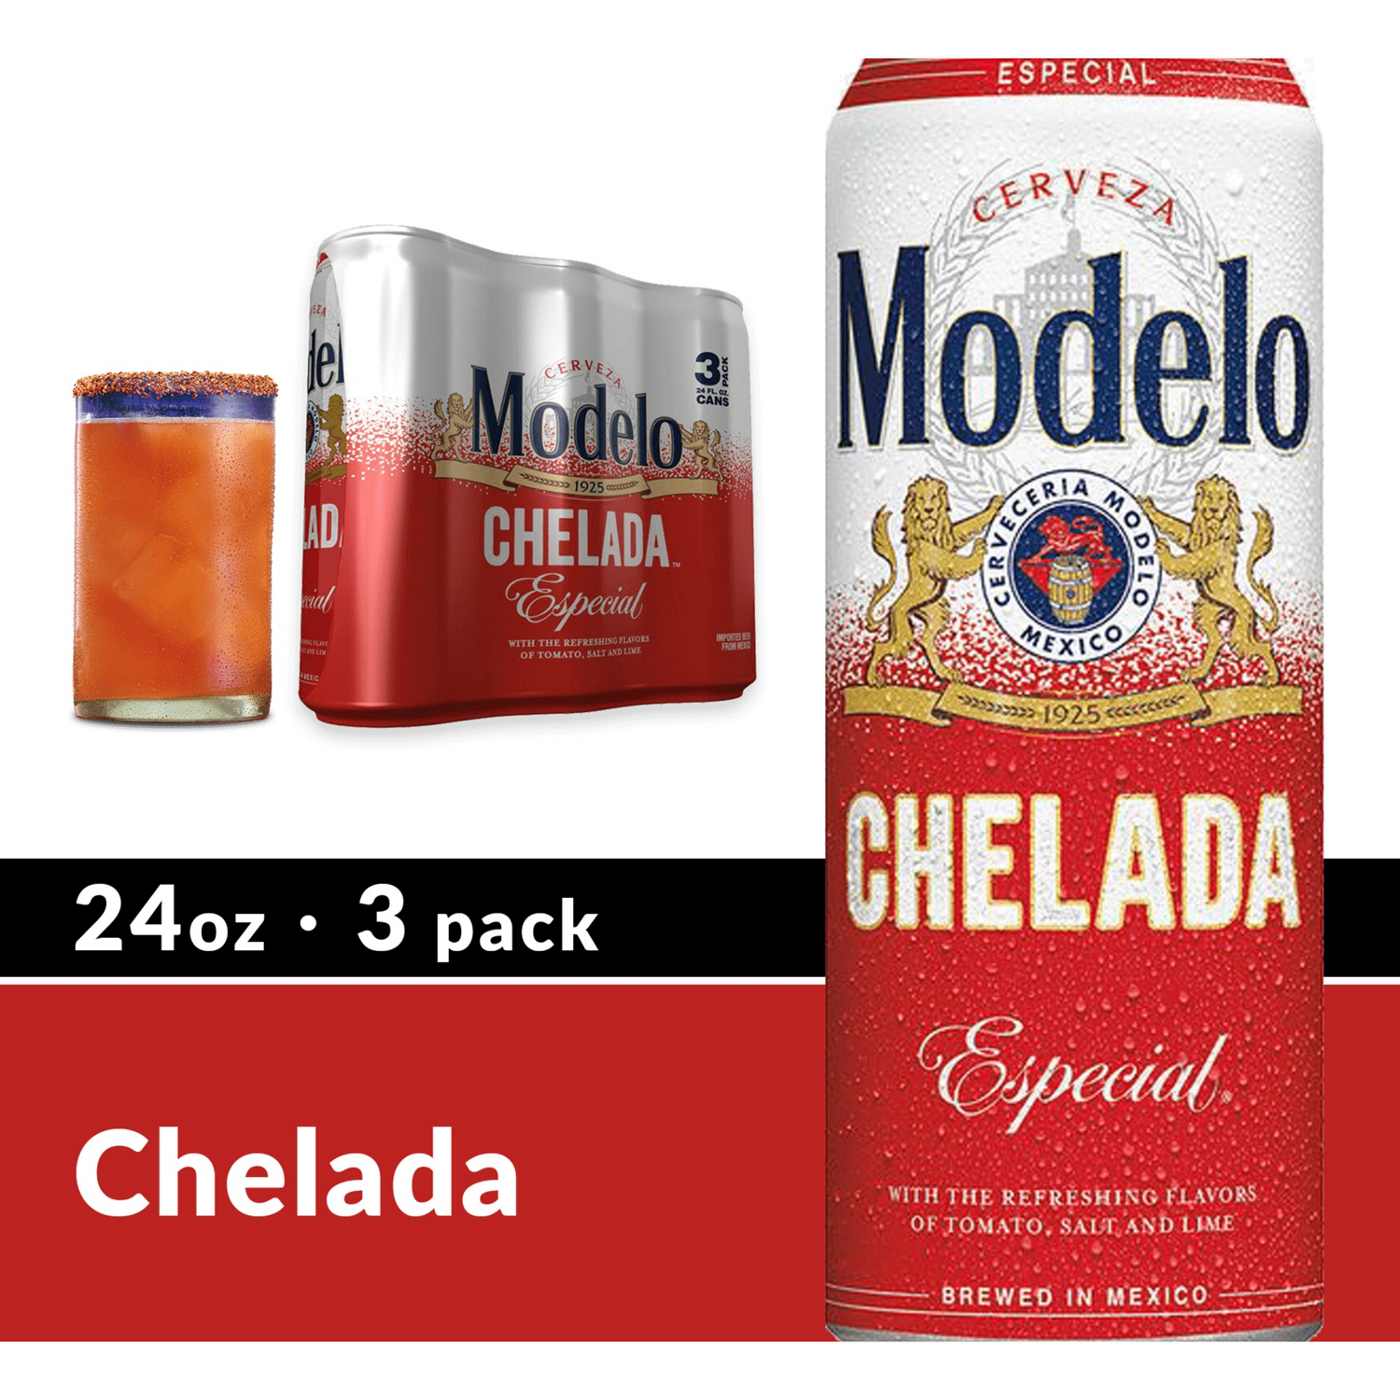 Modelo Chelada Mexican Import Flavored Beer 24 oz Cans, 3 pk; image 10 of 10